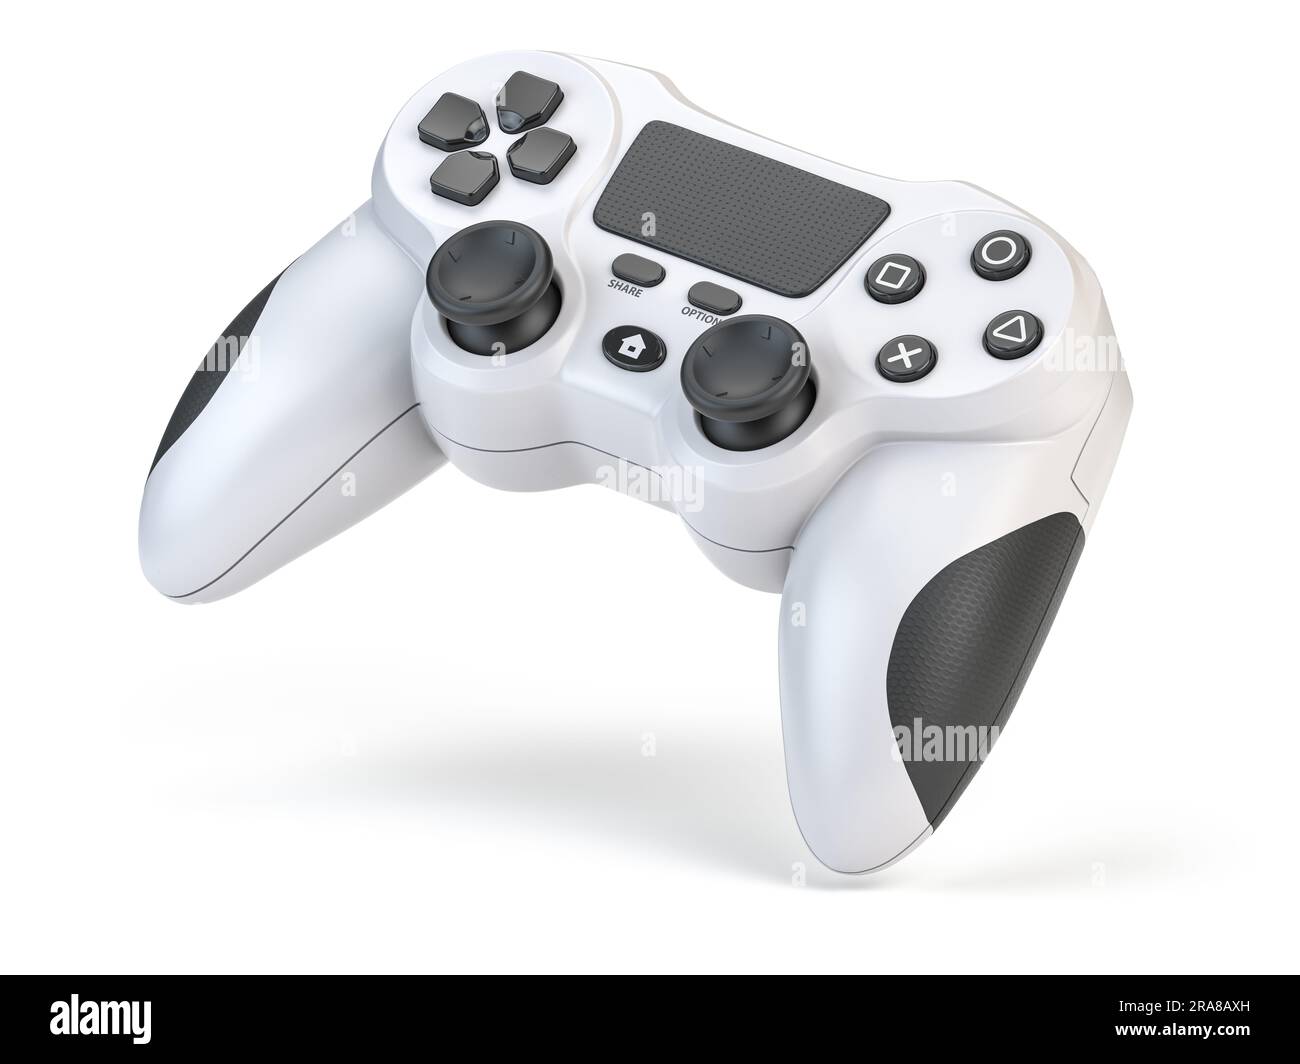 Game joystick or gaming controller isolated on white. 3d illustration Stock Photo